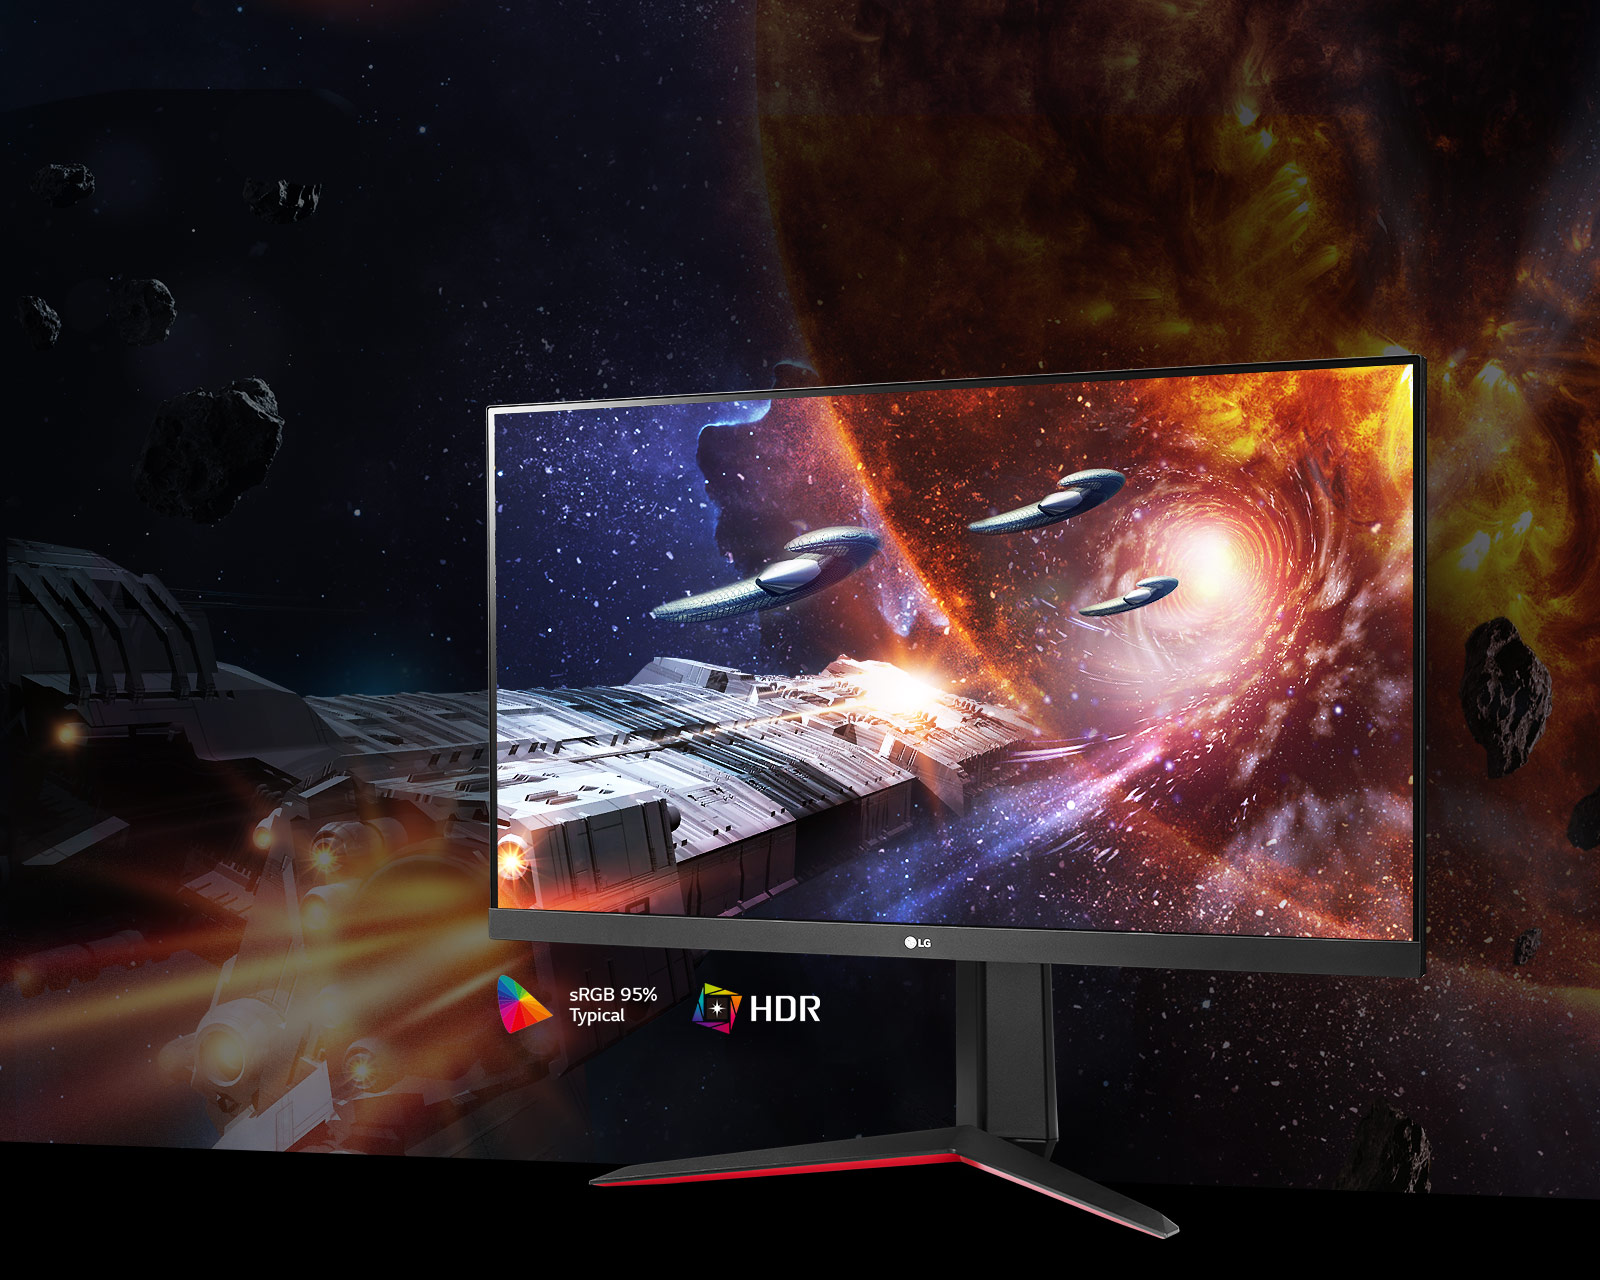 The Gaming Scene in Rich Colors and Contrast on The Monitor Supporting Hdr10 With Srgb 95% (Typ.) 